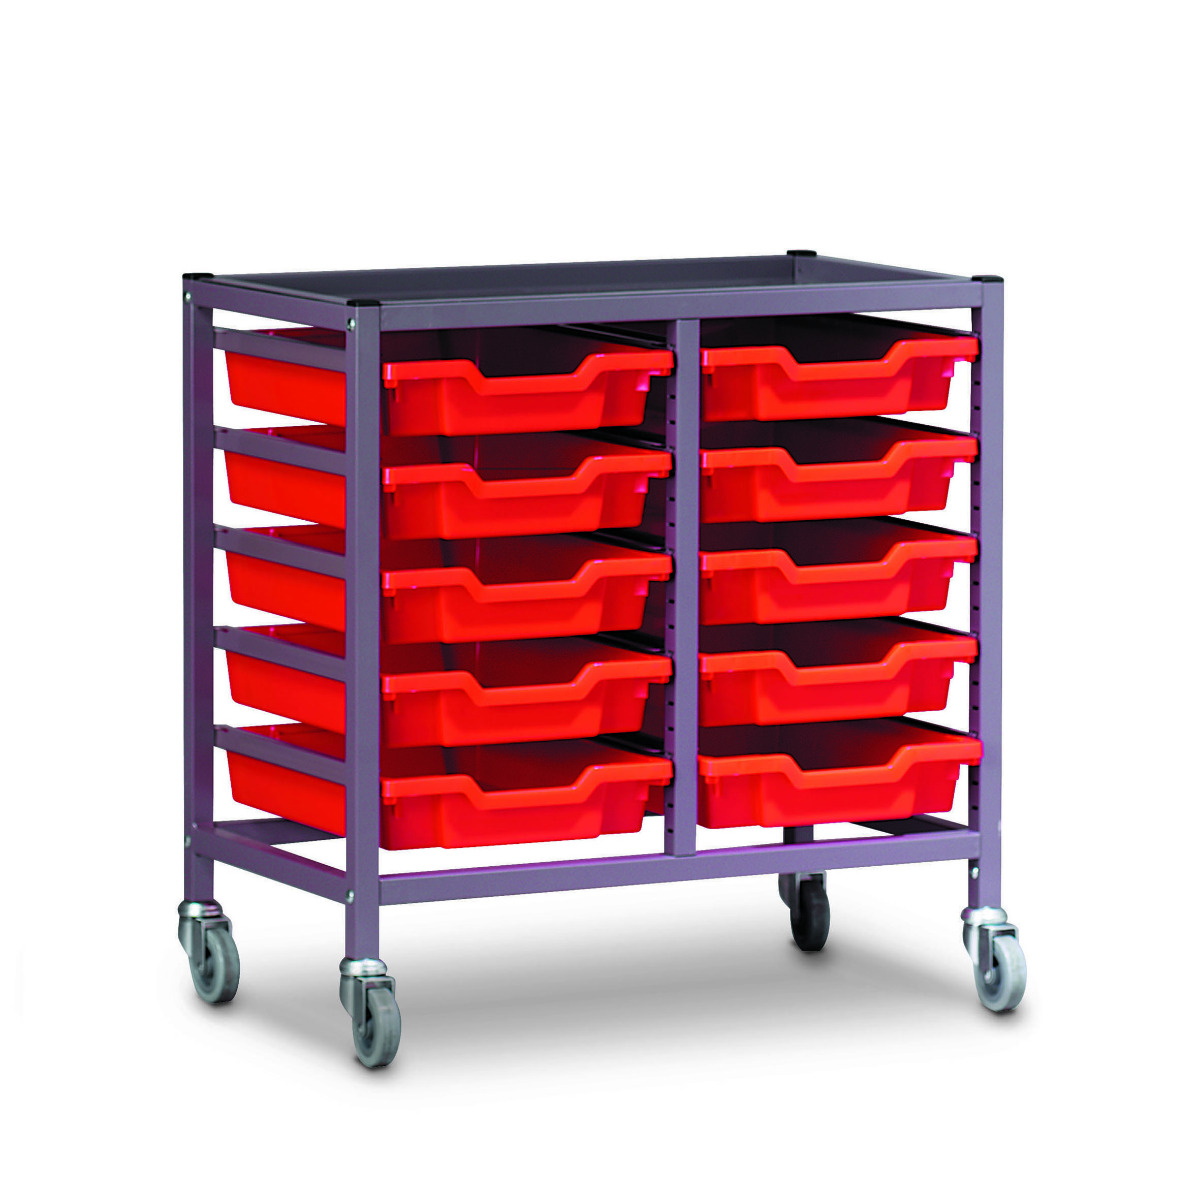 TecniStor Mobile 10 Tray Trolley